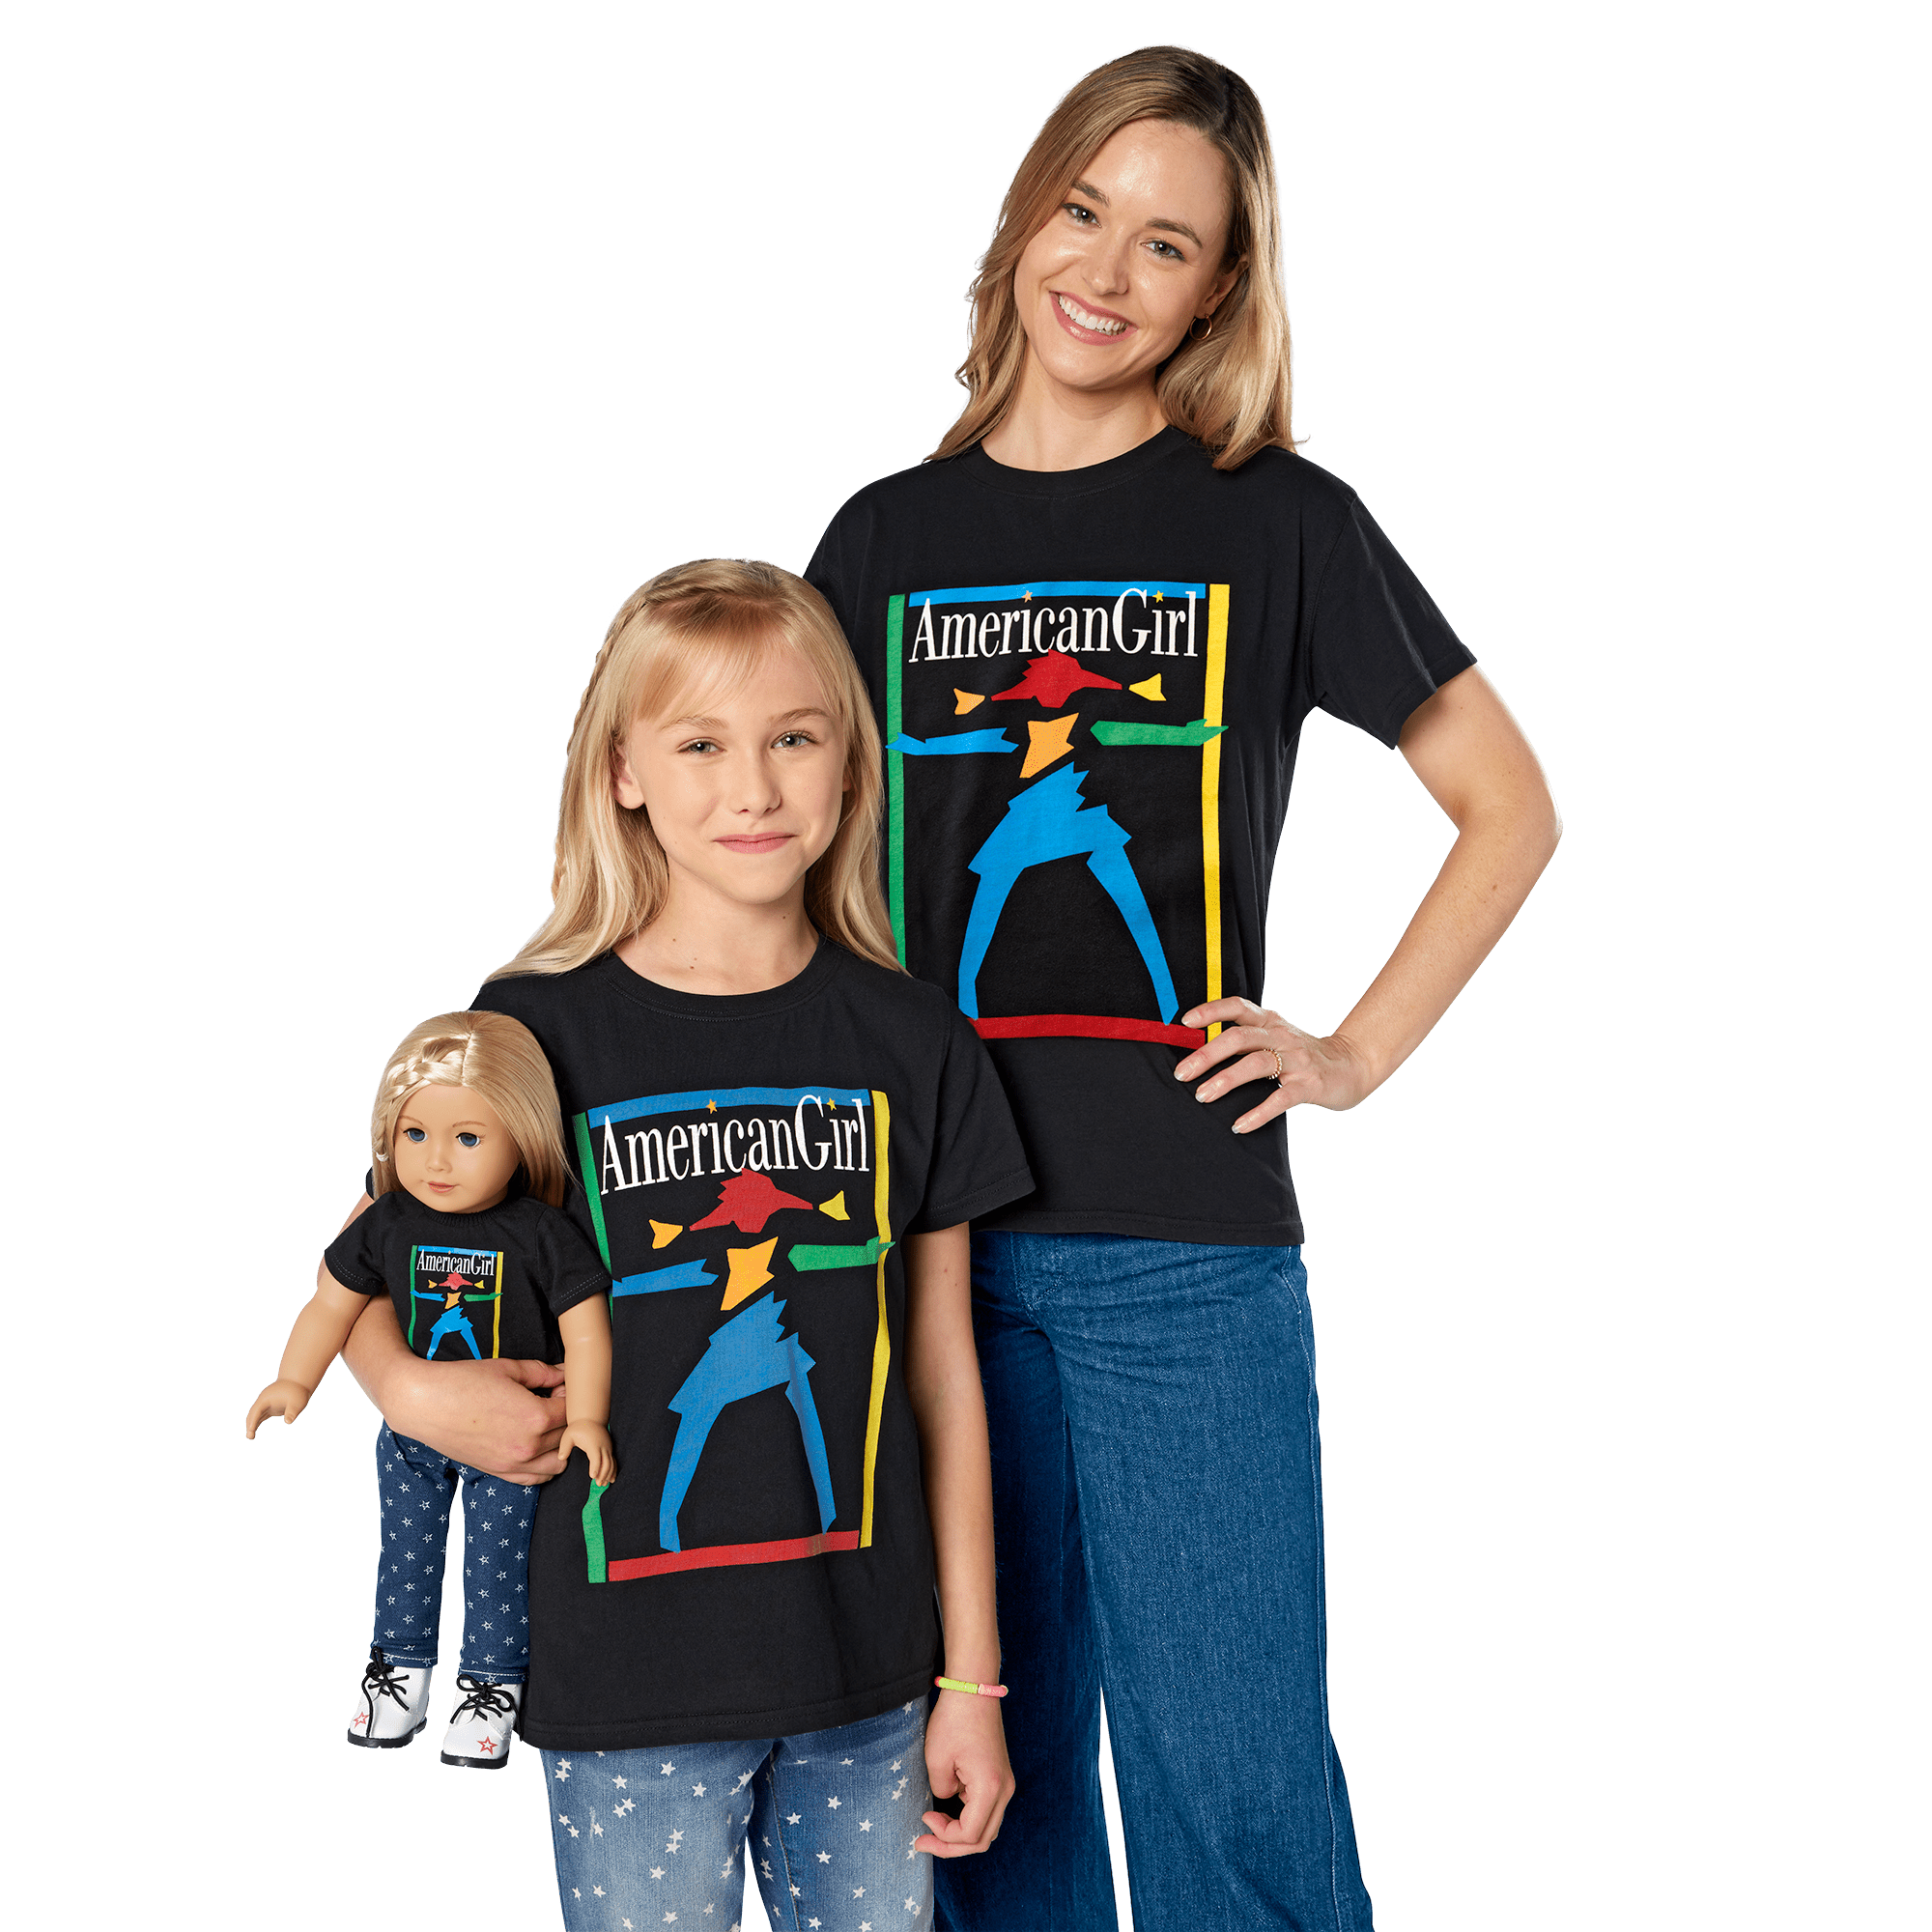 American Girl Today™ Tees for Adults, Girls & 18-inch Dolls (Historical Characters)